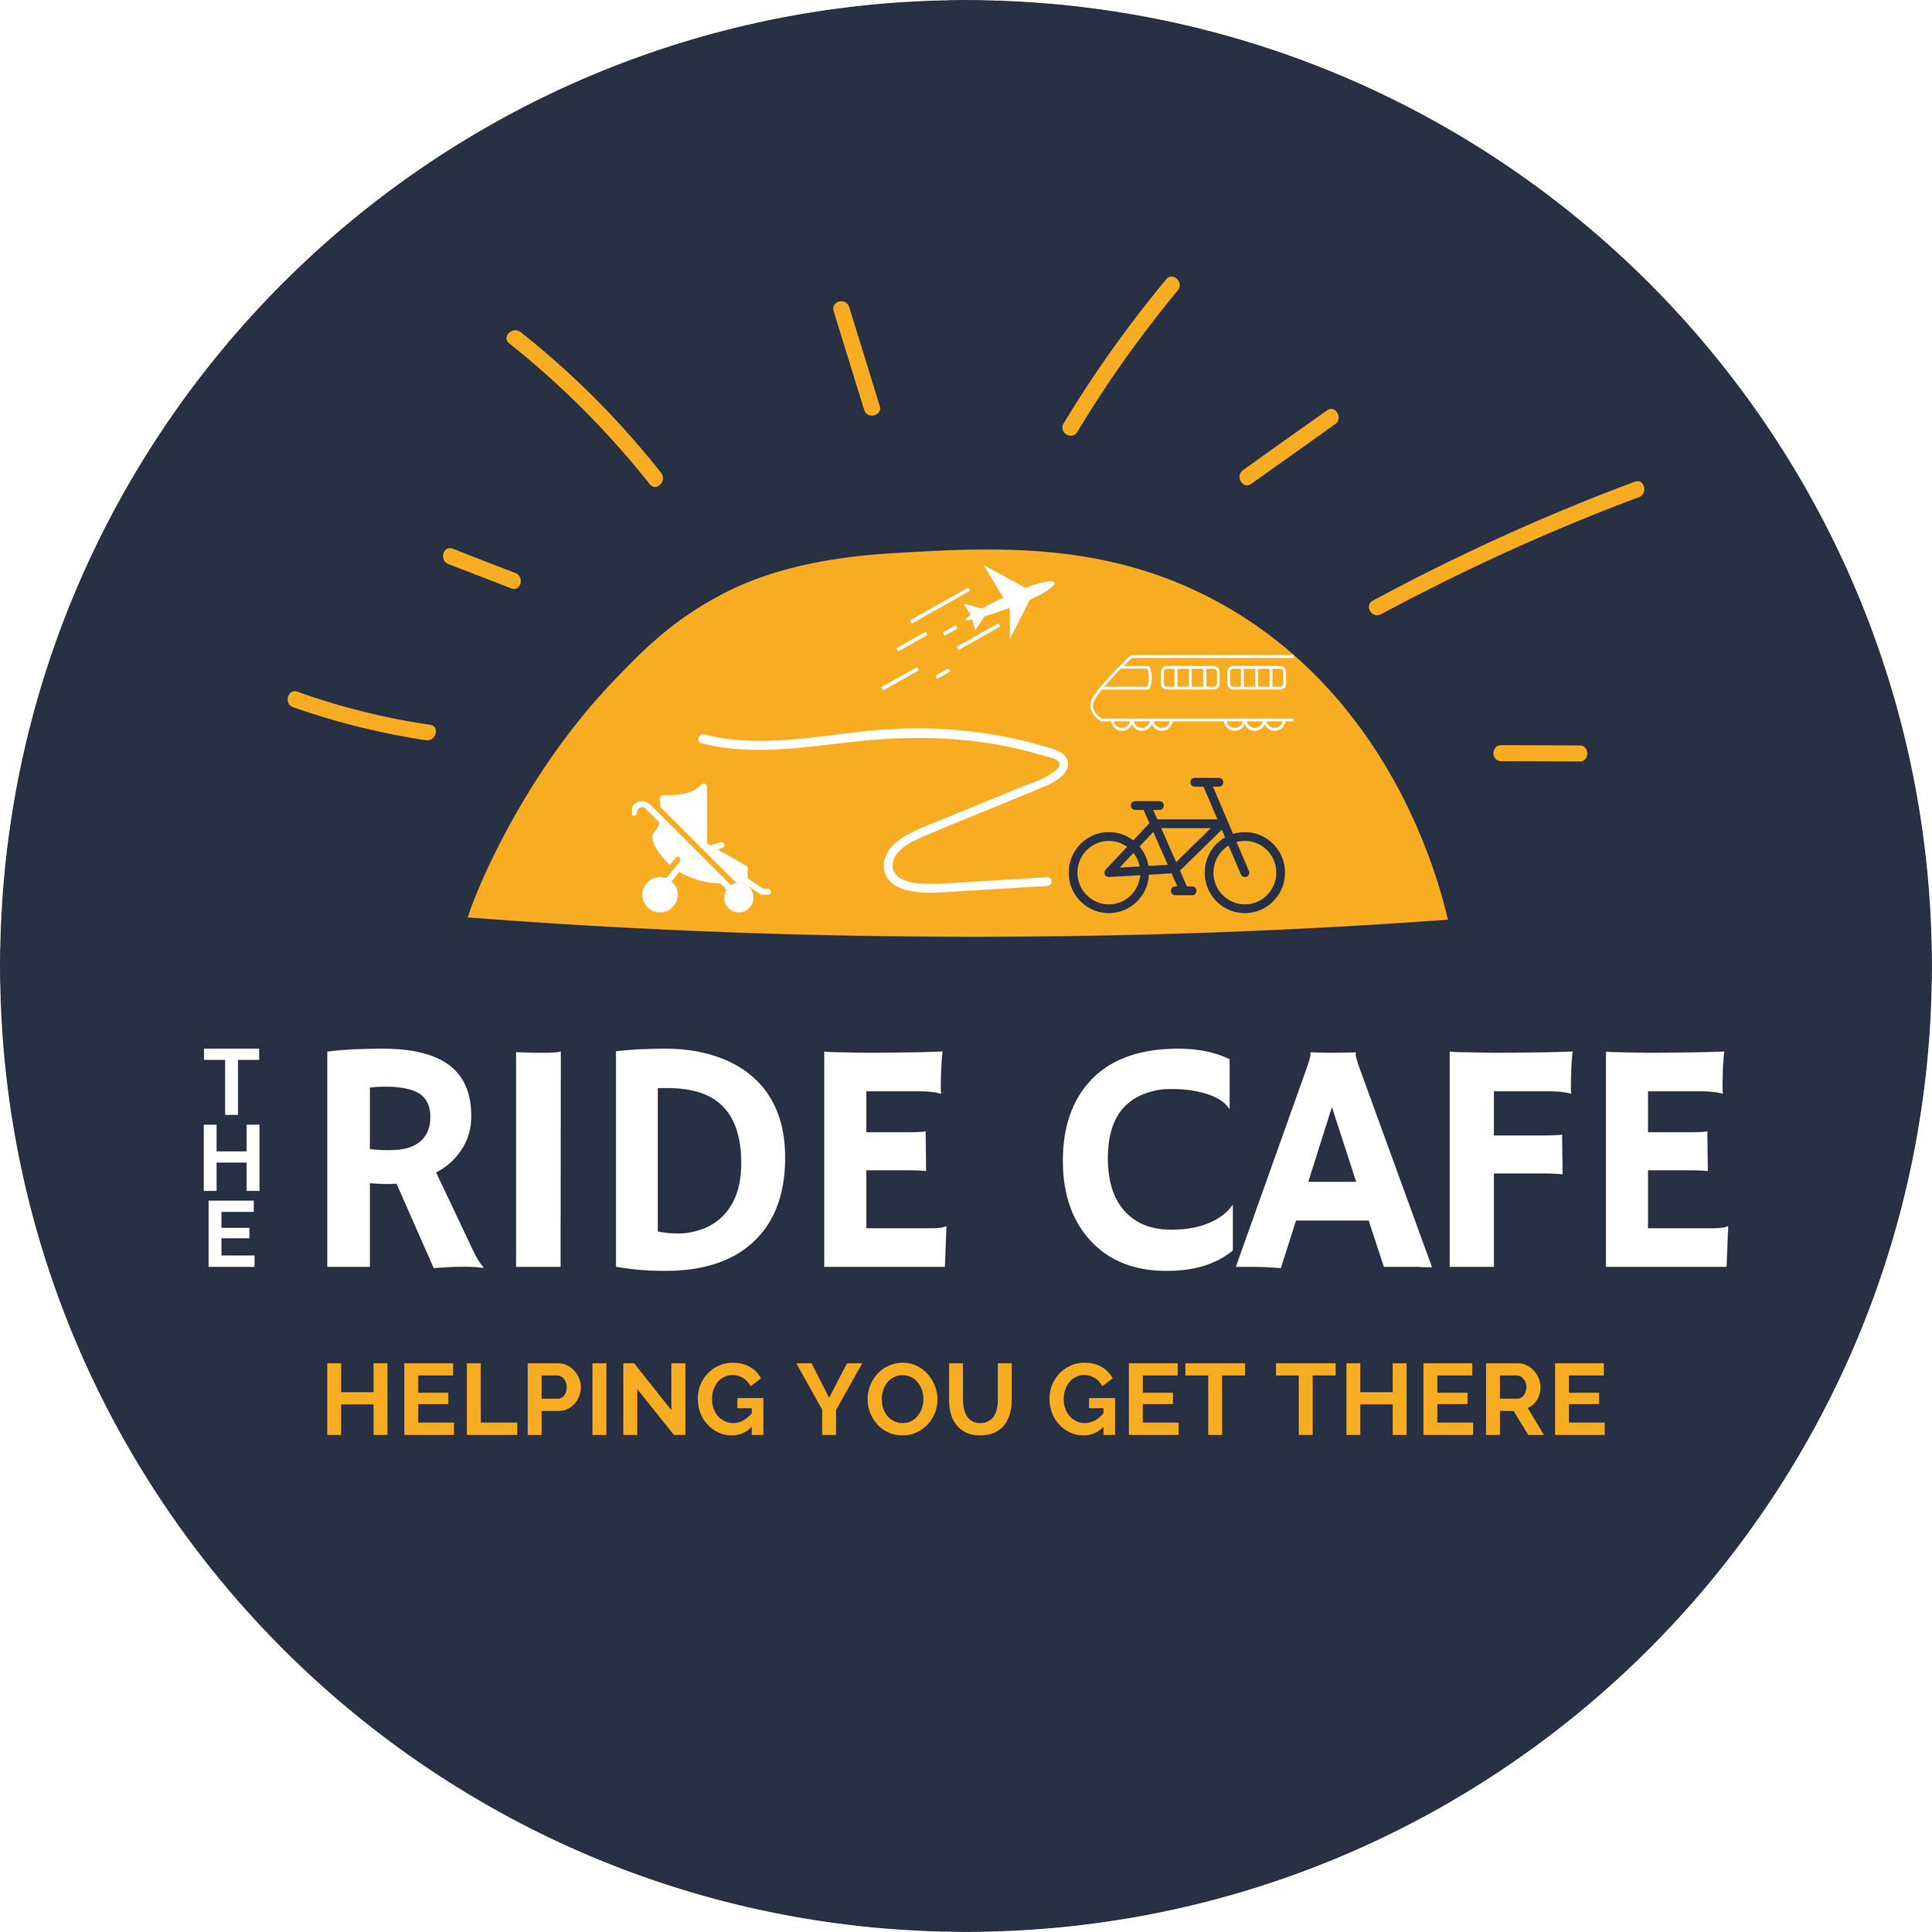 The ride cafe (Circle).png